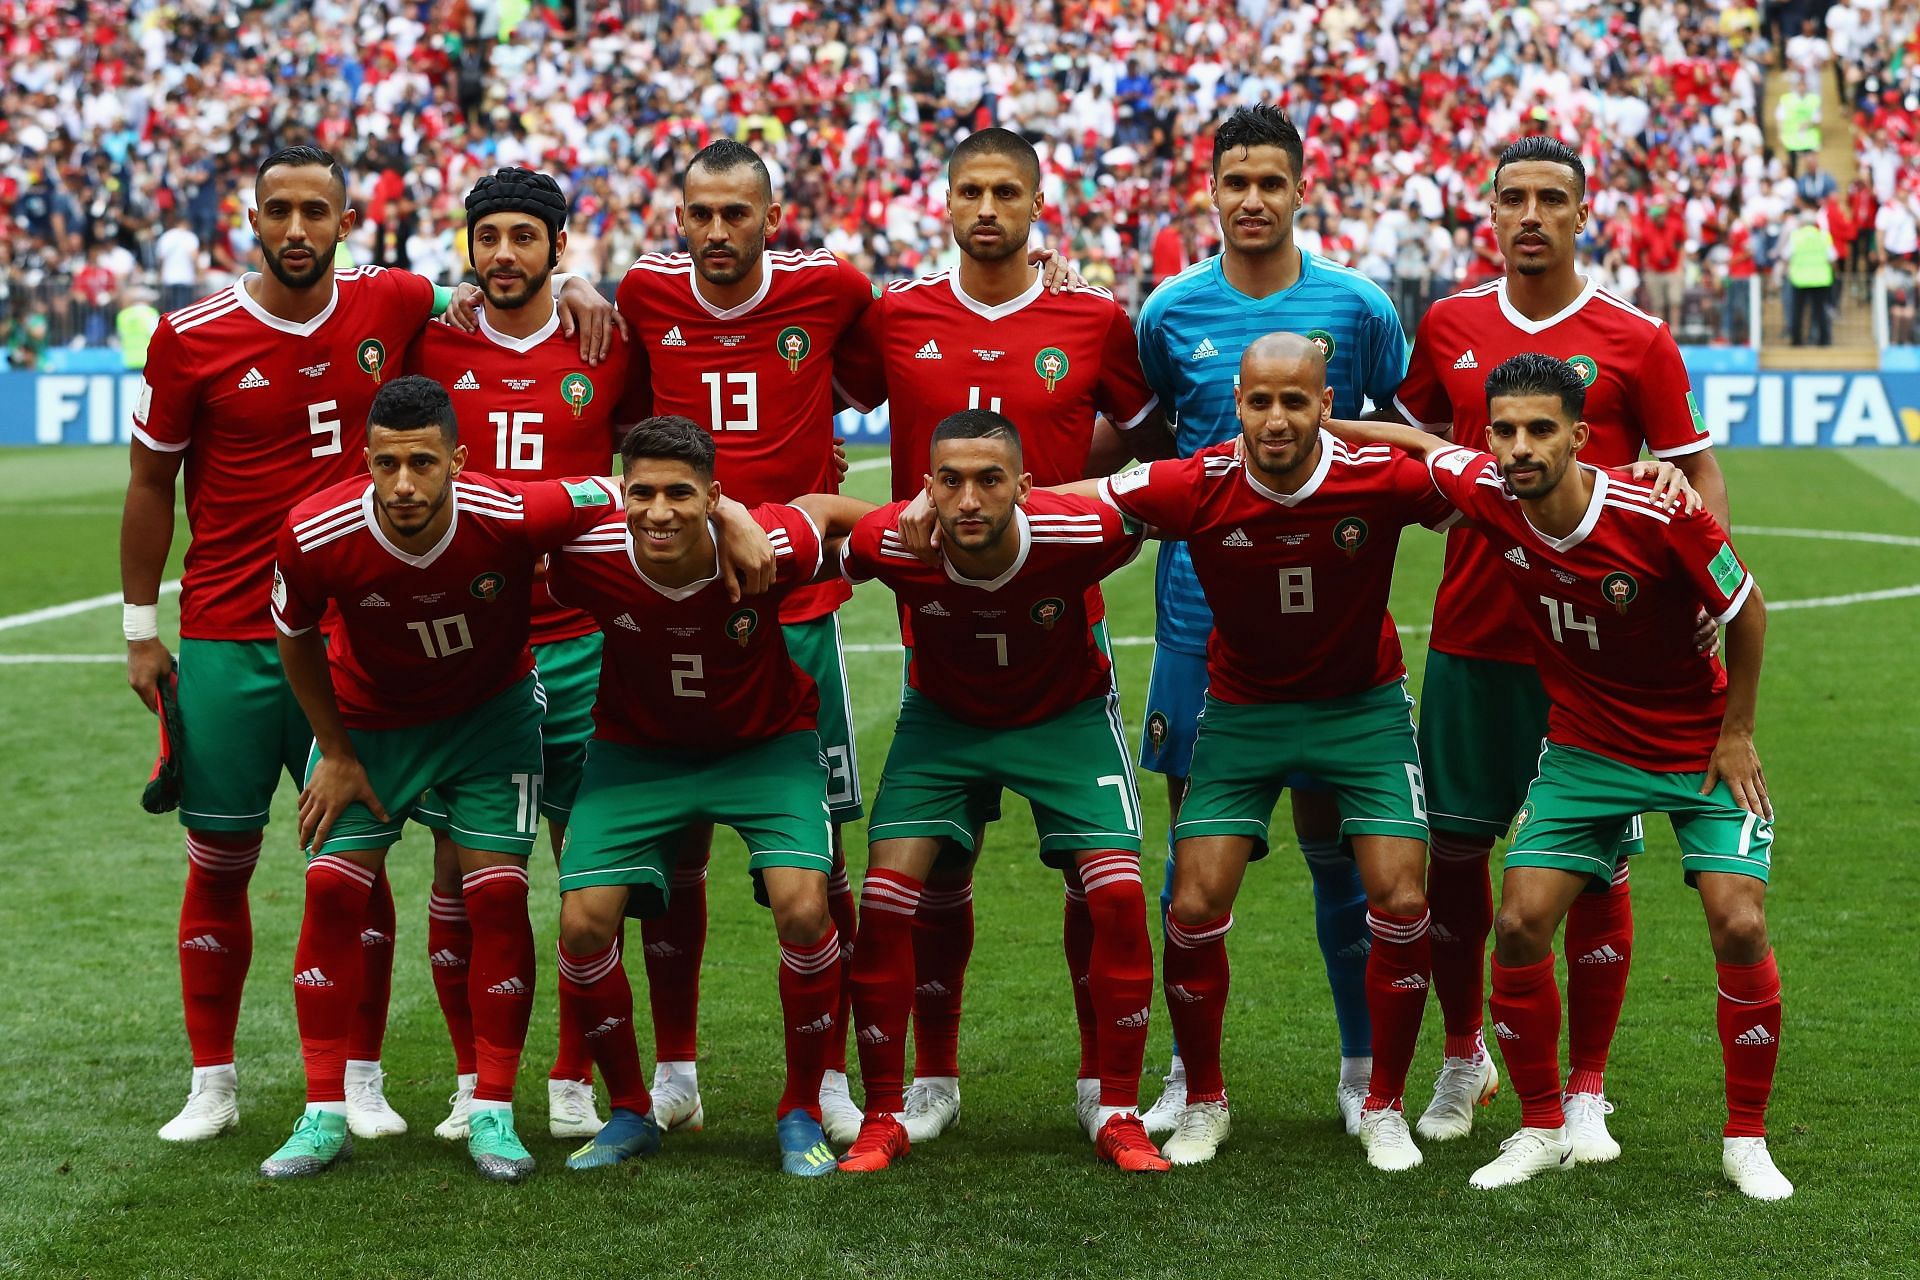 Morocco striking a team pose at the 2018 FIFA World Cup